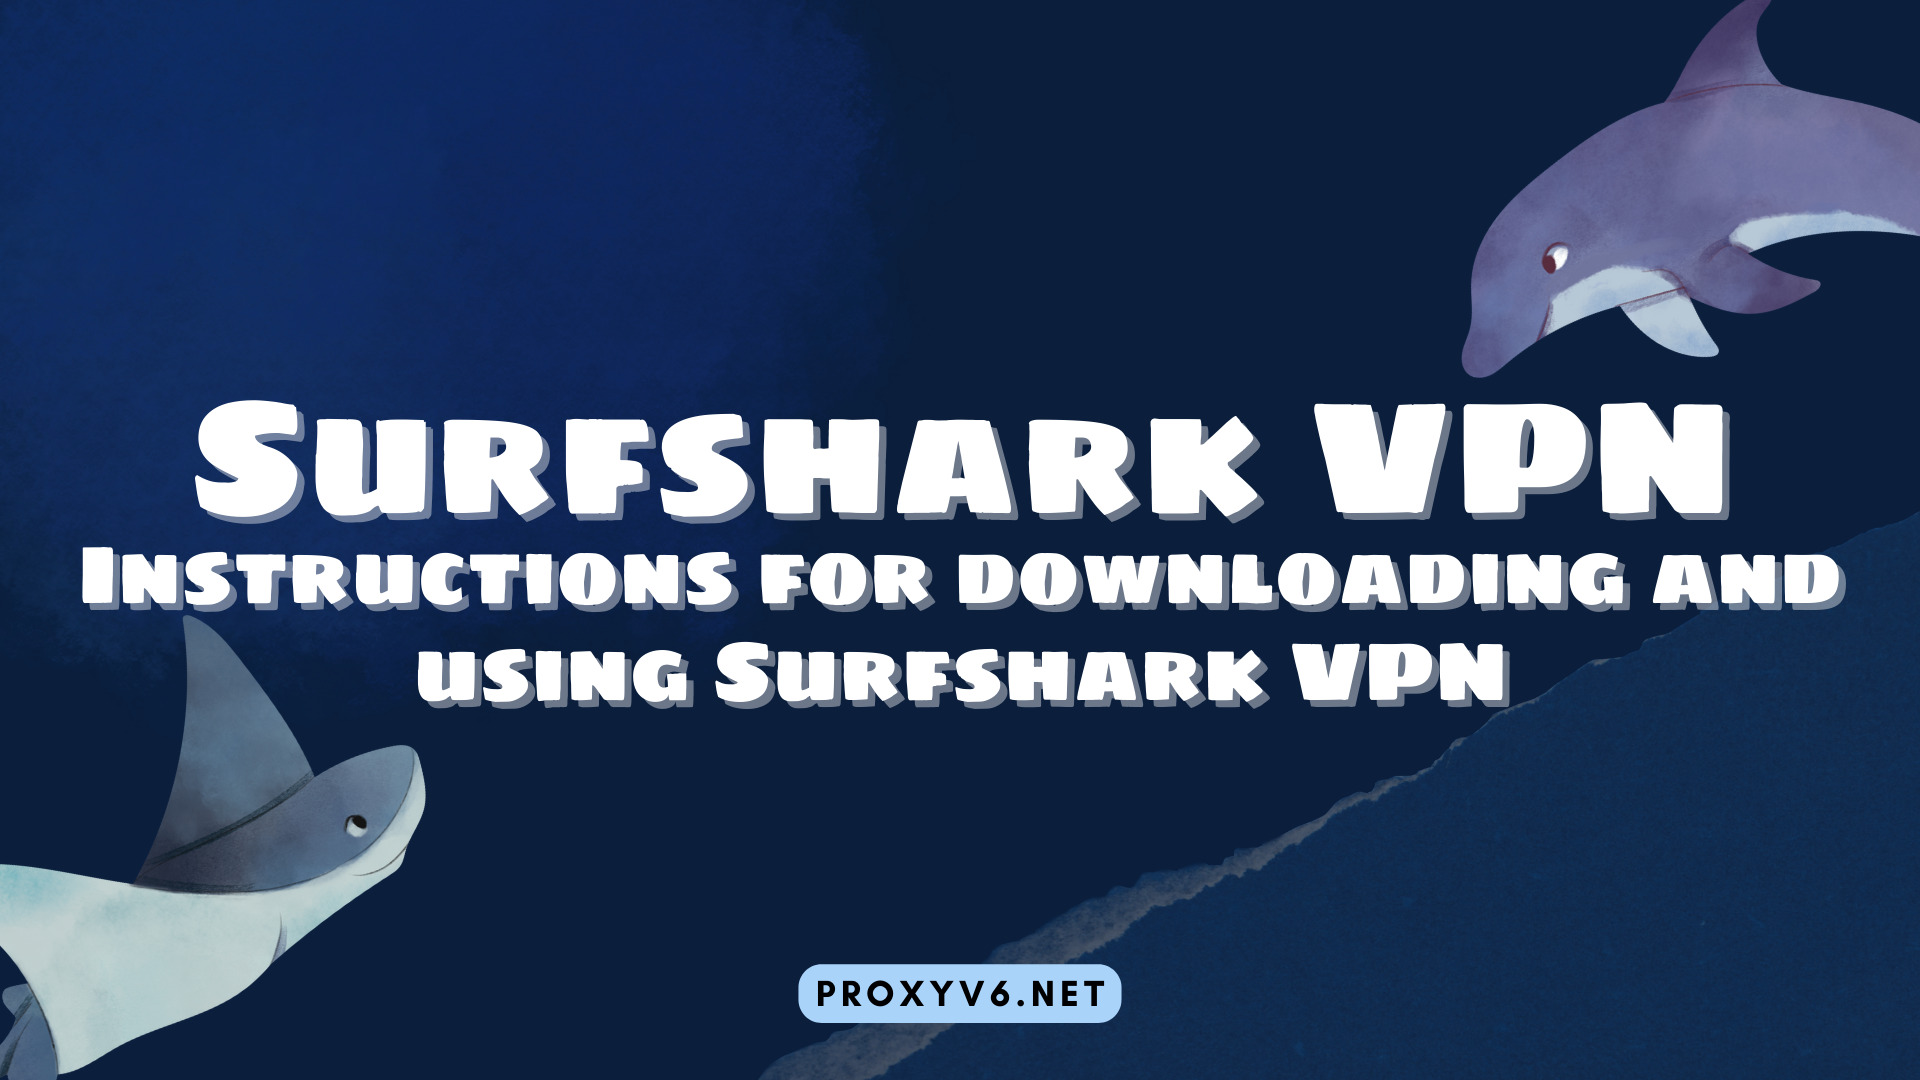 What is a proxy server and when to use it - Surfshark